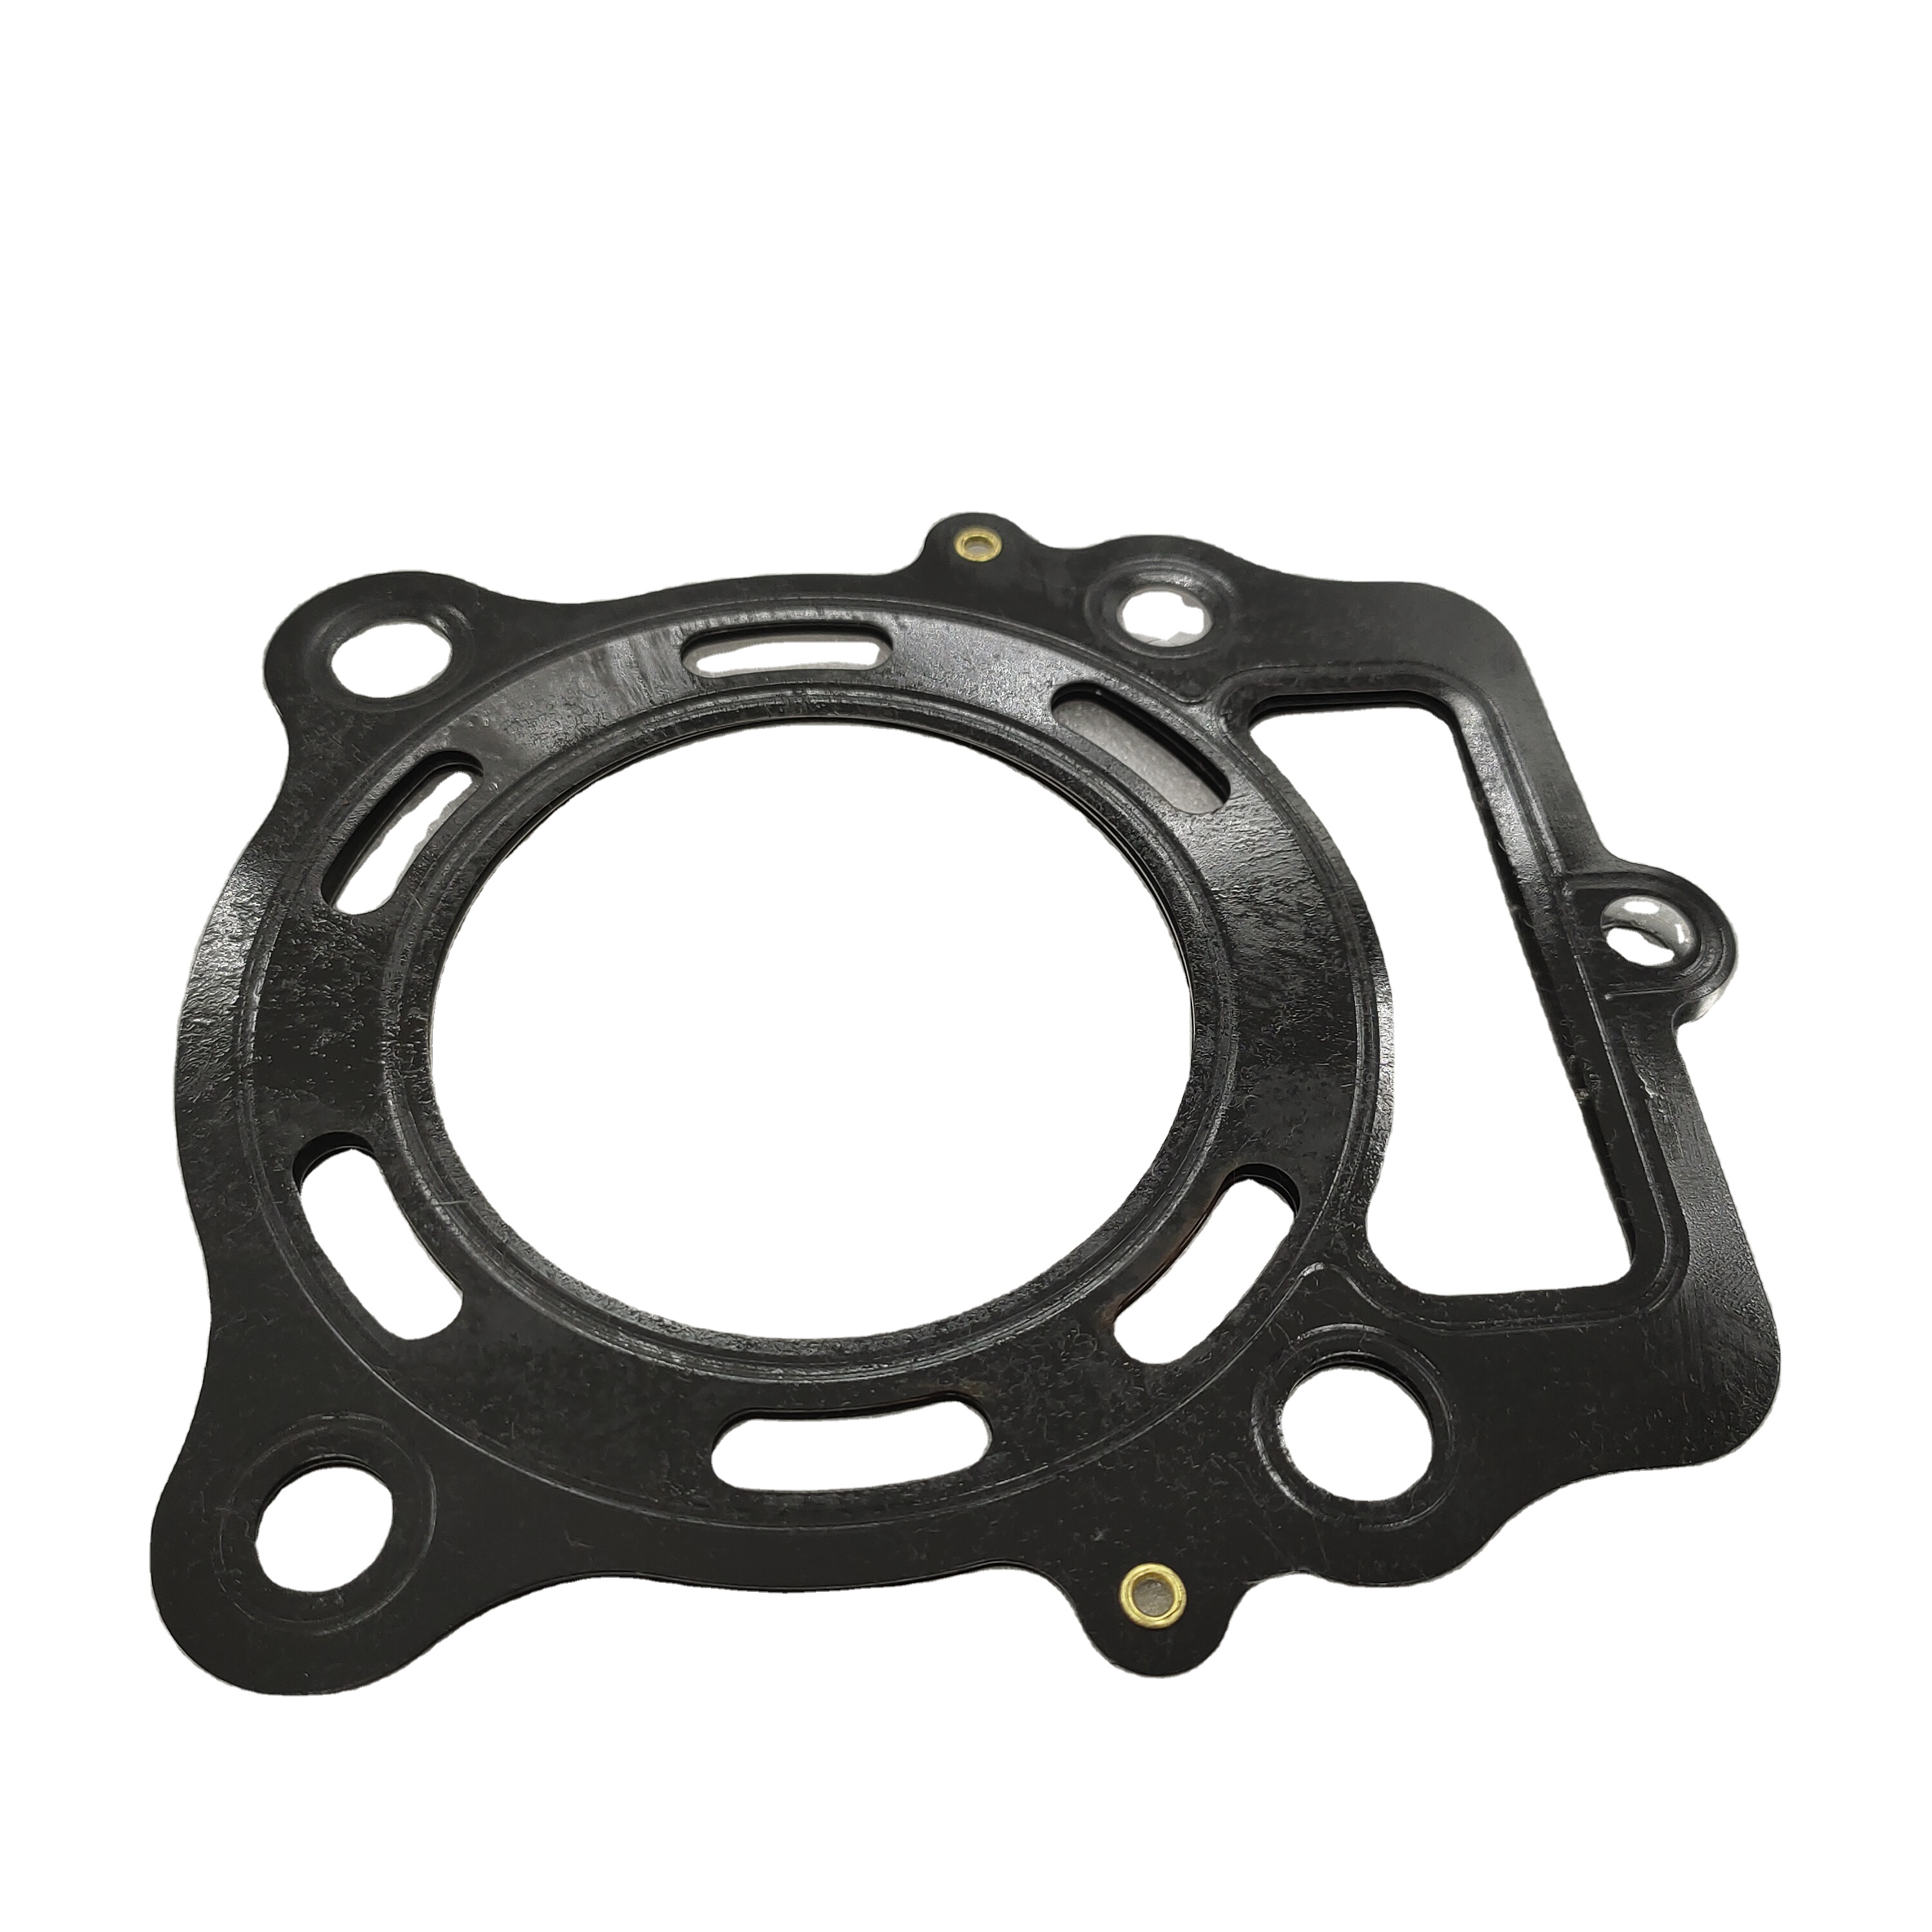 DAYANG Motorcycle Engine Parts Cylinder Head gasket Oem Quality Parts Motorcycle Origin Type High Warranty Product